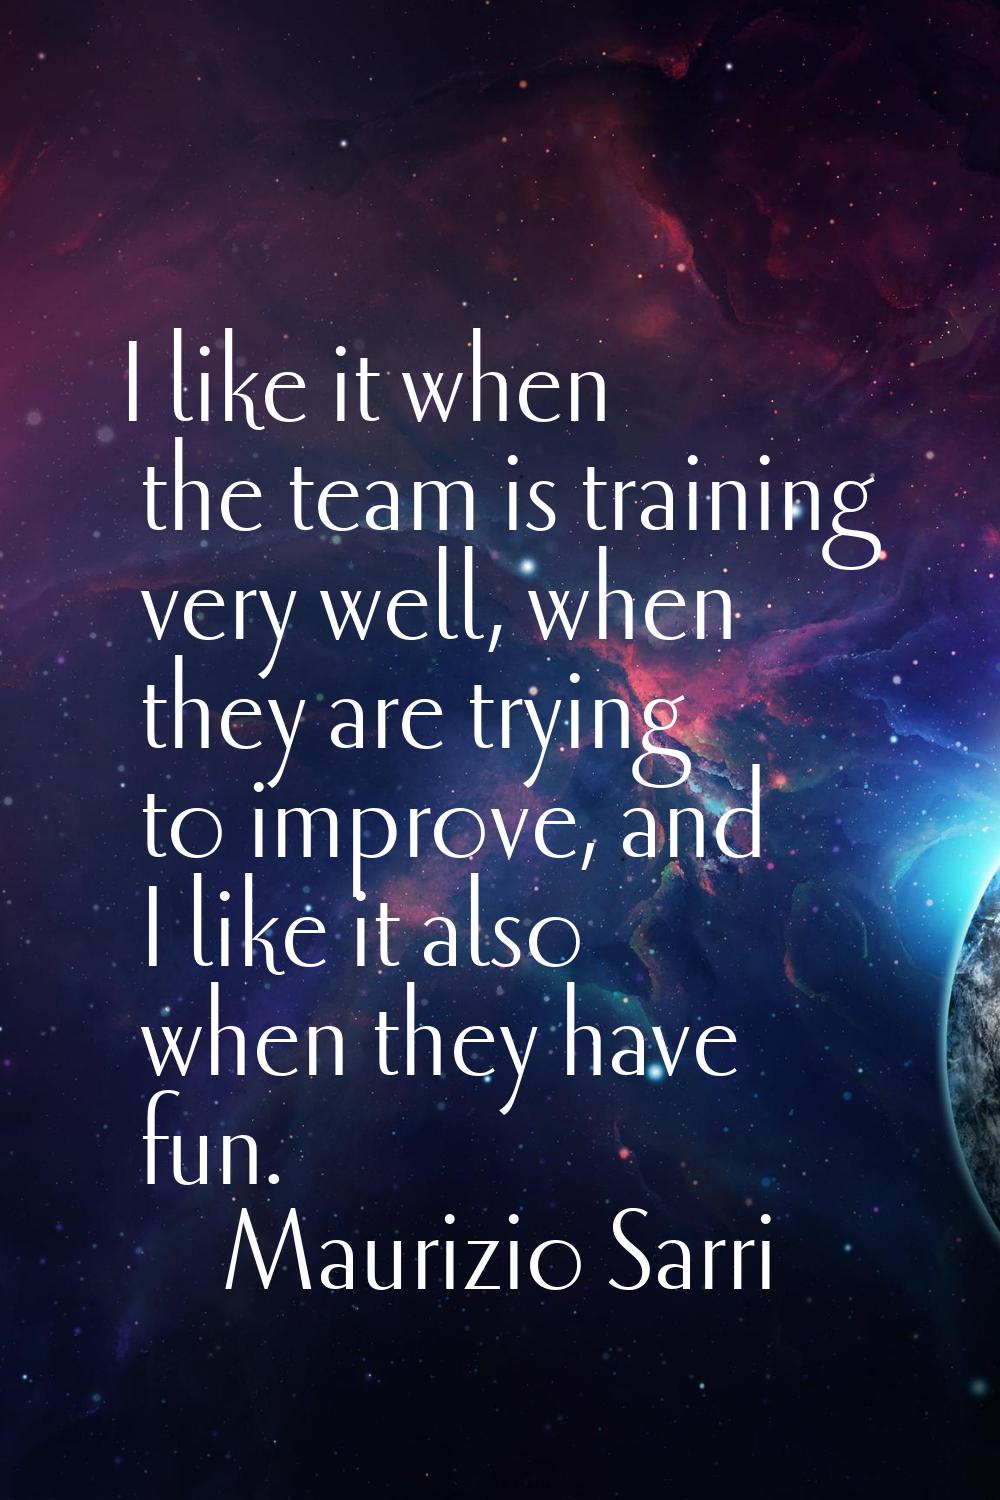 I like it when the team is training very well, when they are trying to improve, and I like it also 